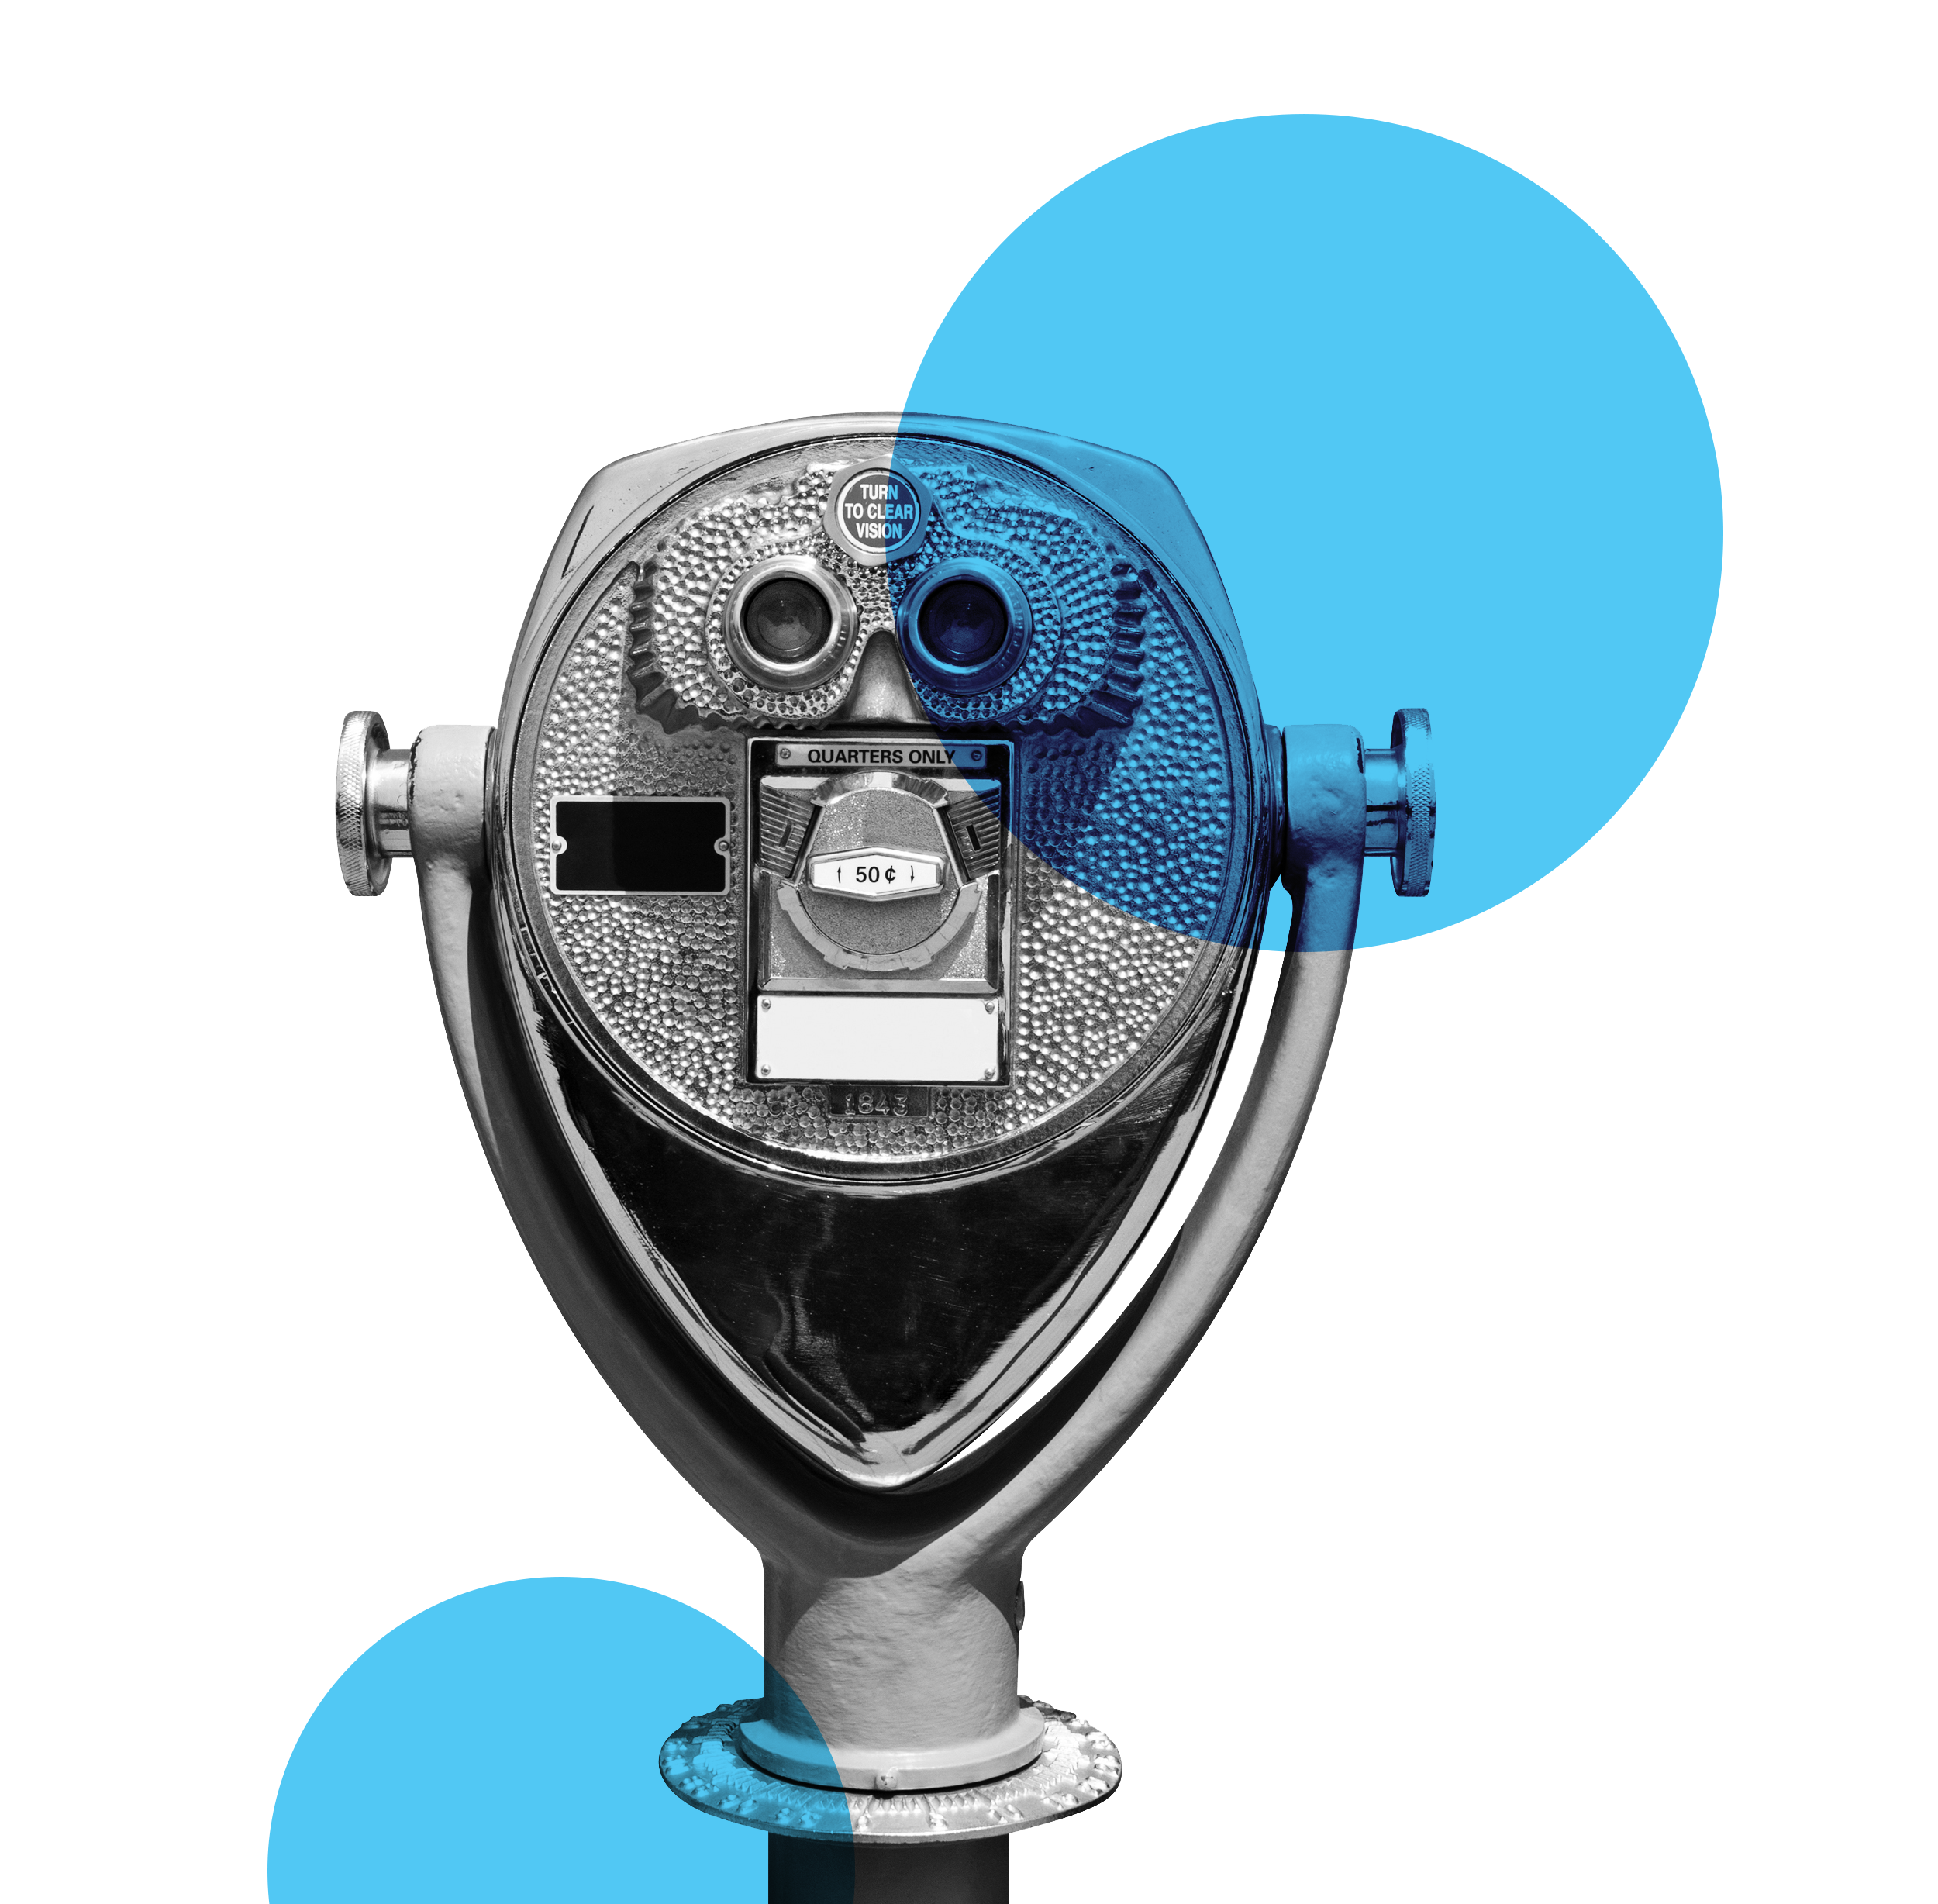 Cutout image of a black and tourist viewer with blue circles layered over